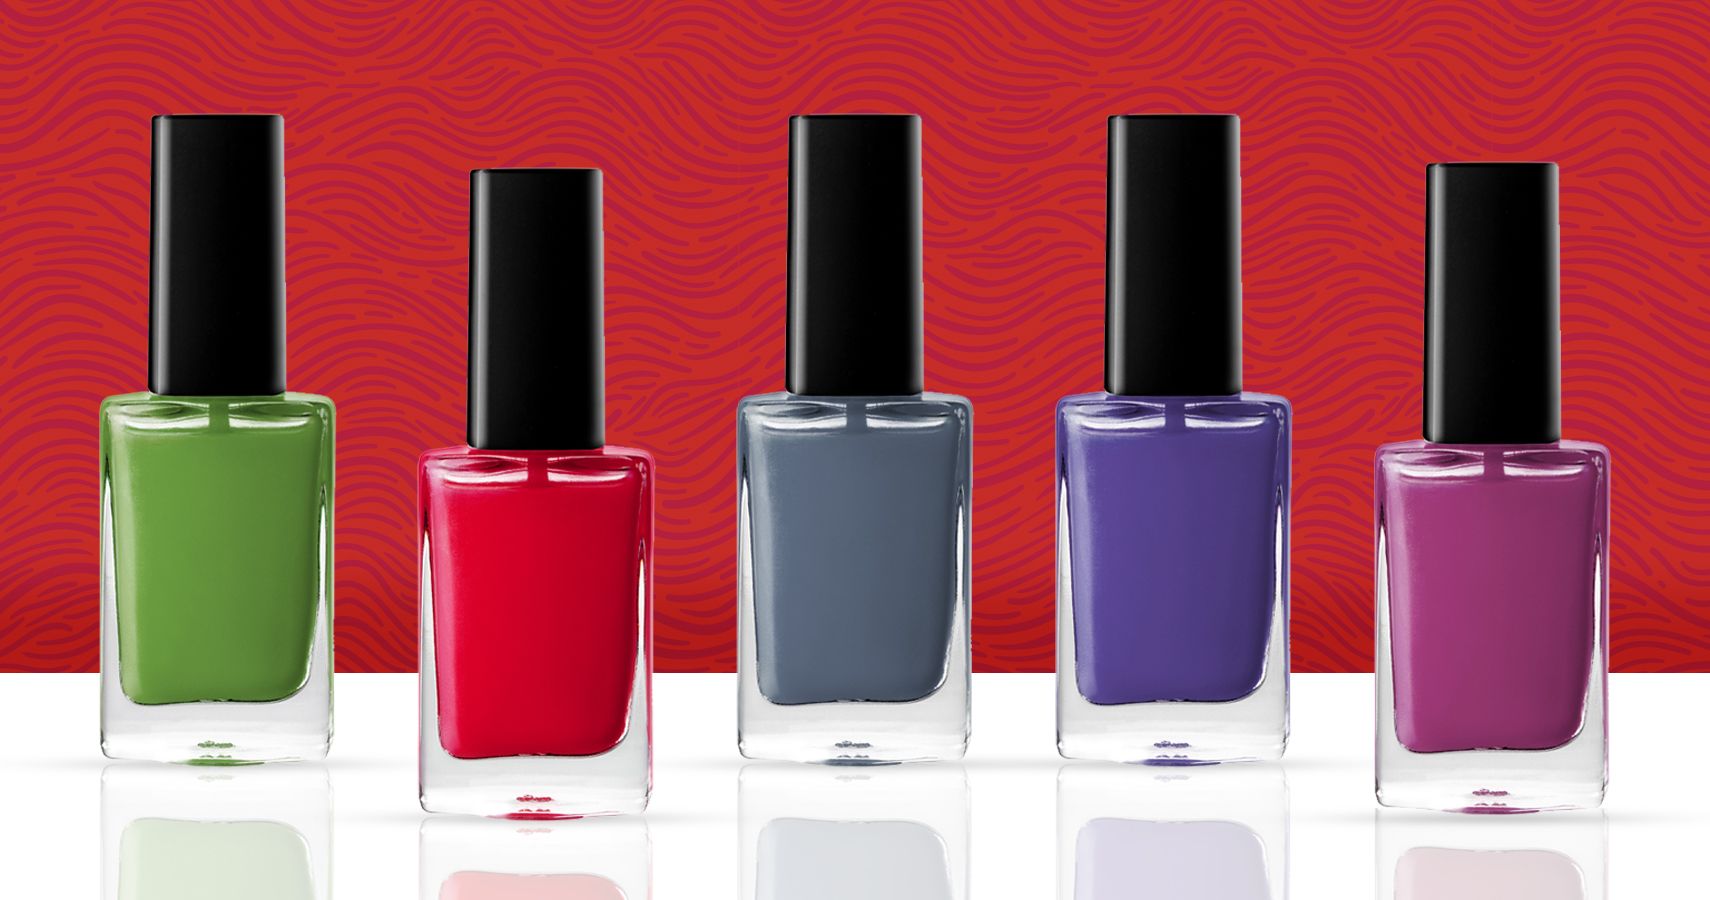 2. "Trendy Fall Nail Colors to Try Now" - wide 10